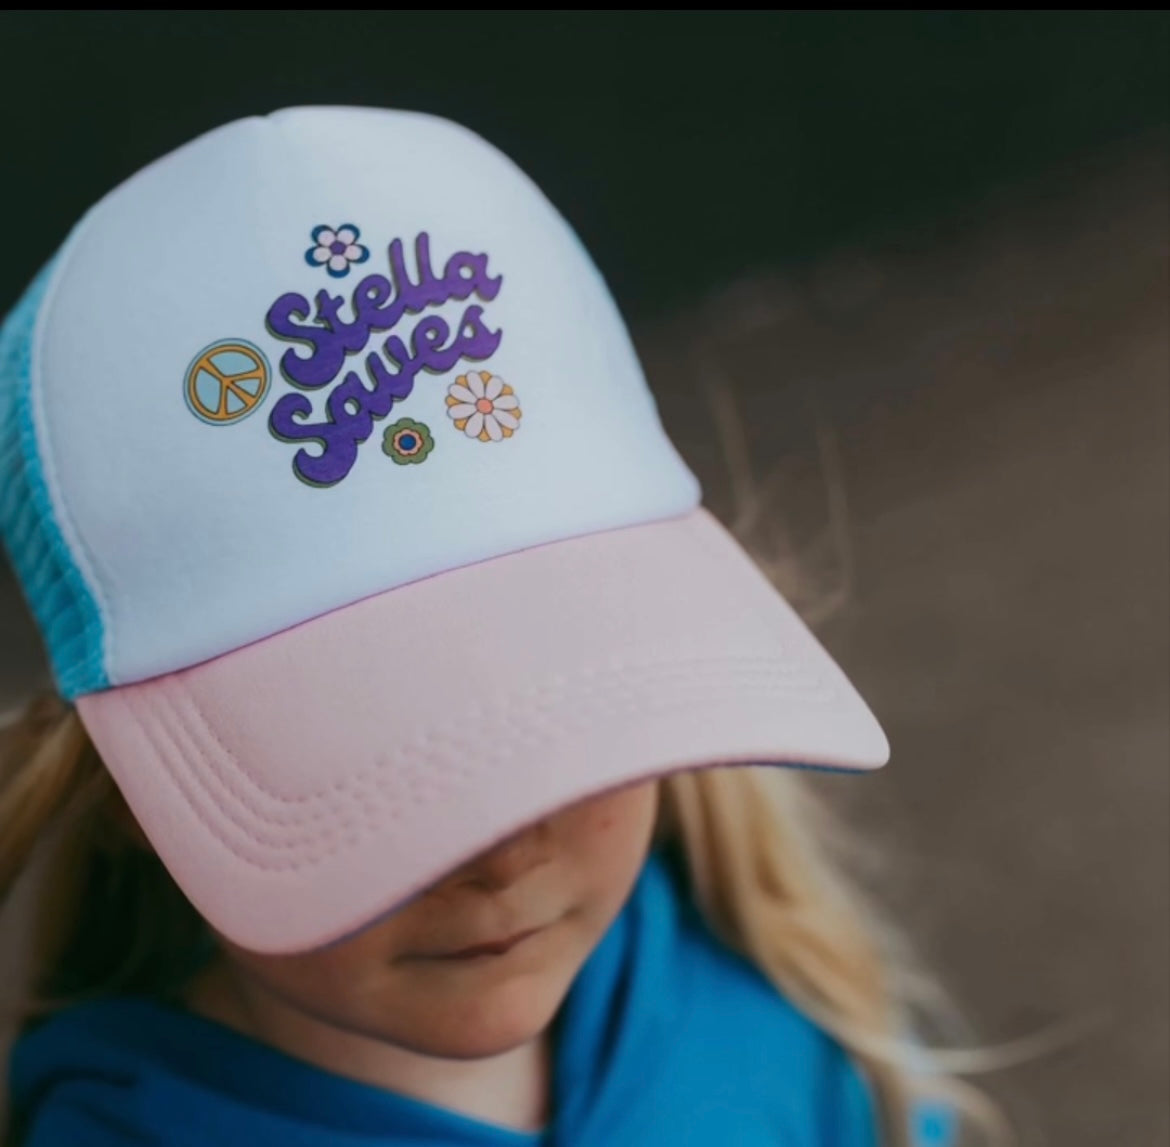 Stella Saves Trucker Hat-Multiple Colours Available - Birch Hill Studio